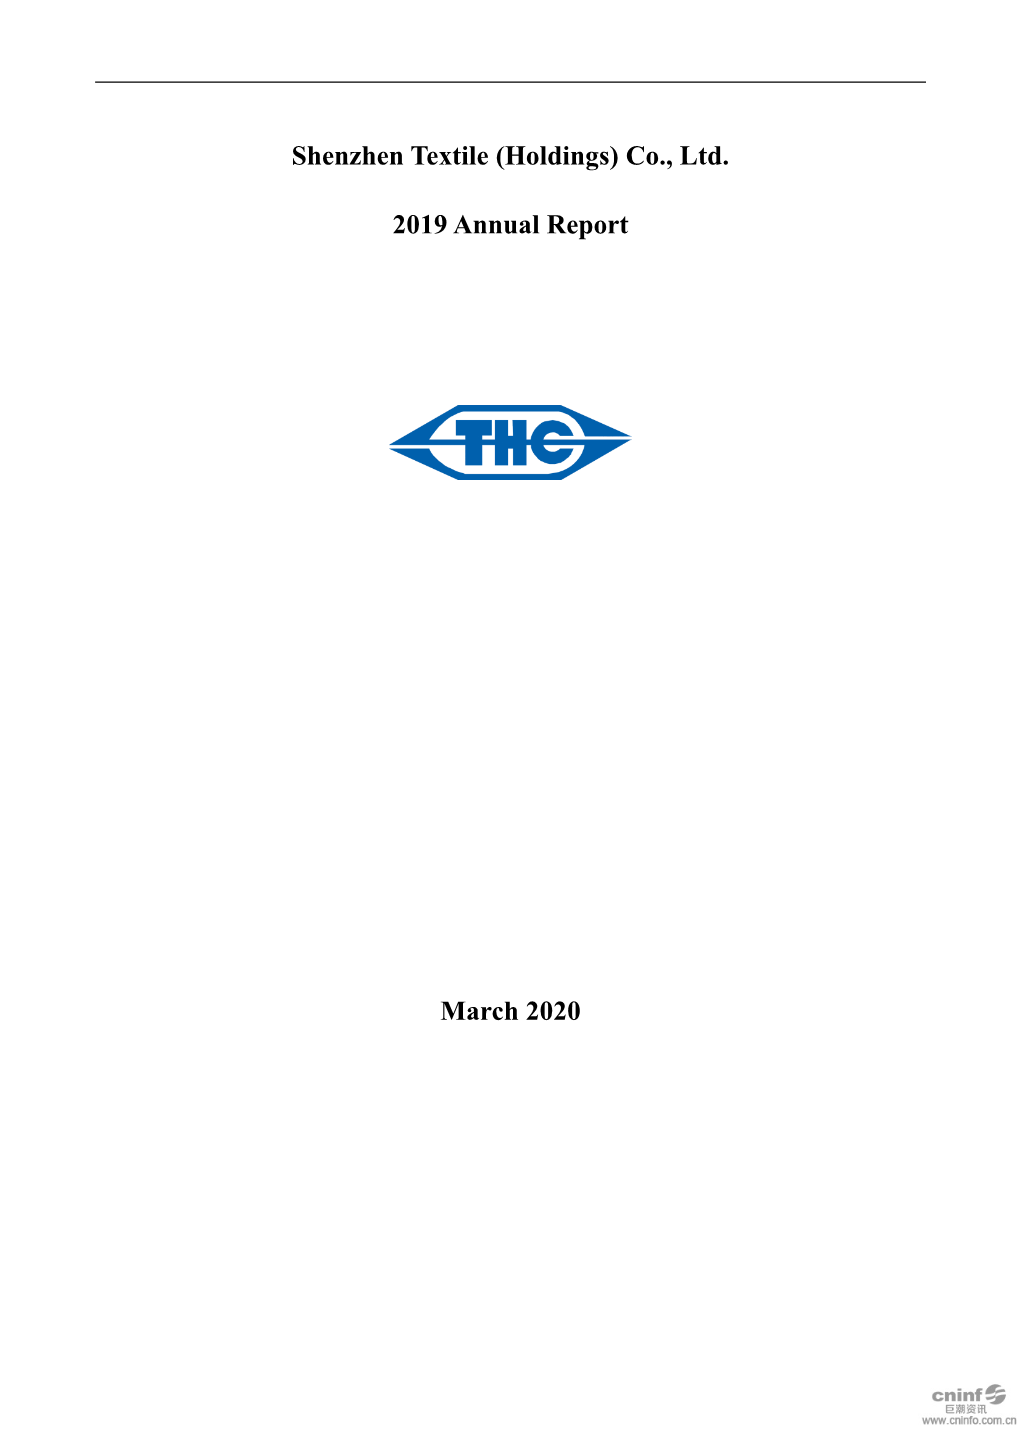 Shenzhen Textile (Holdings) Co., Ltd. 2019 Annual Report March 2020